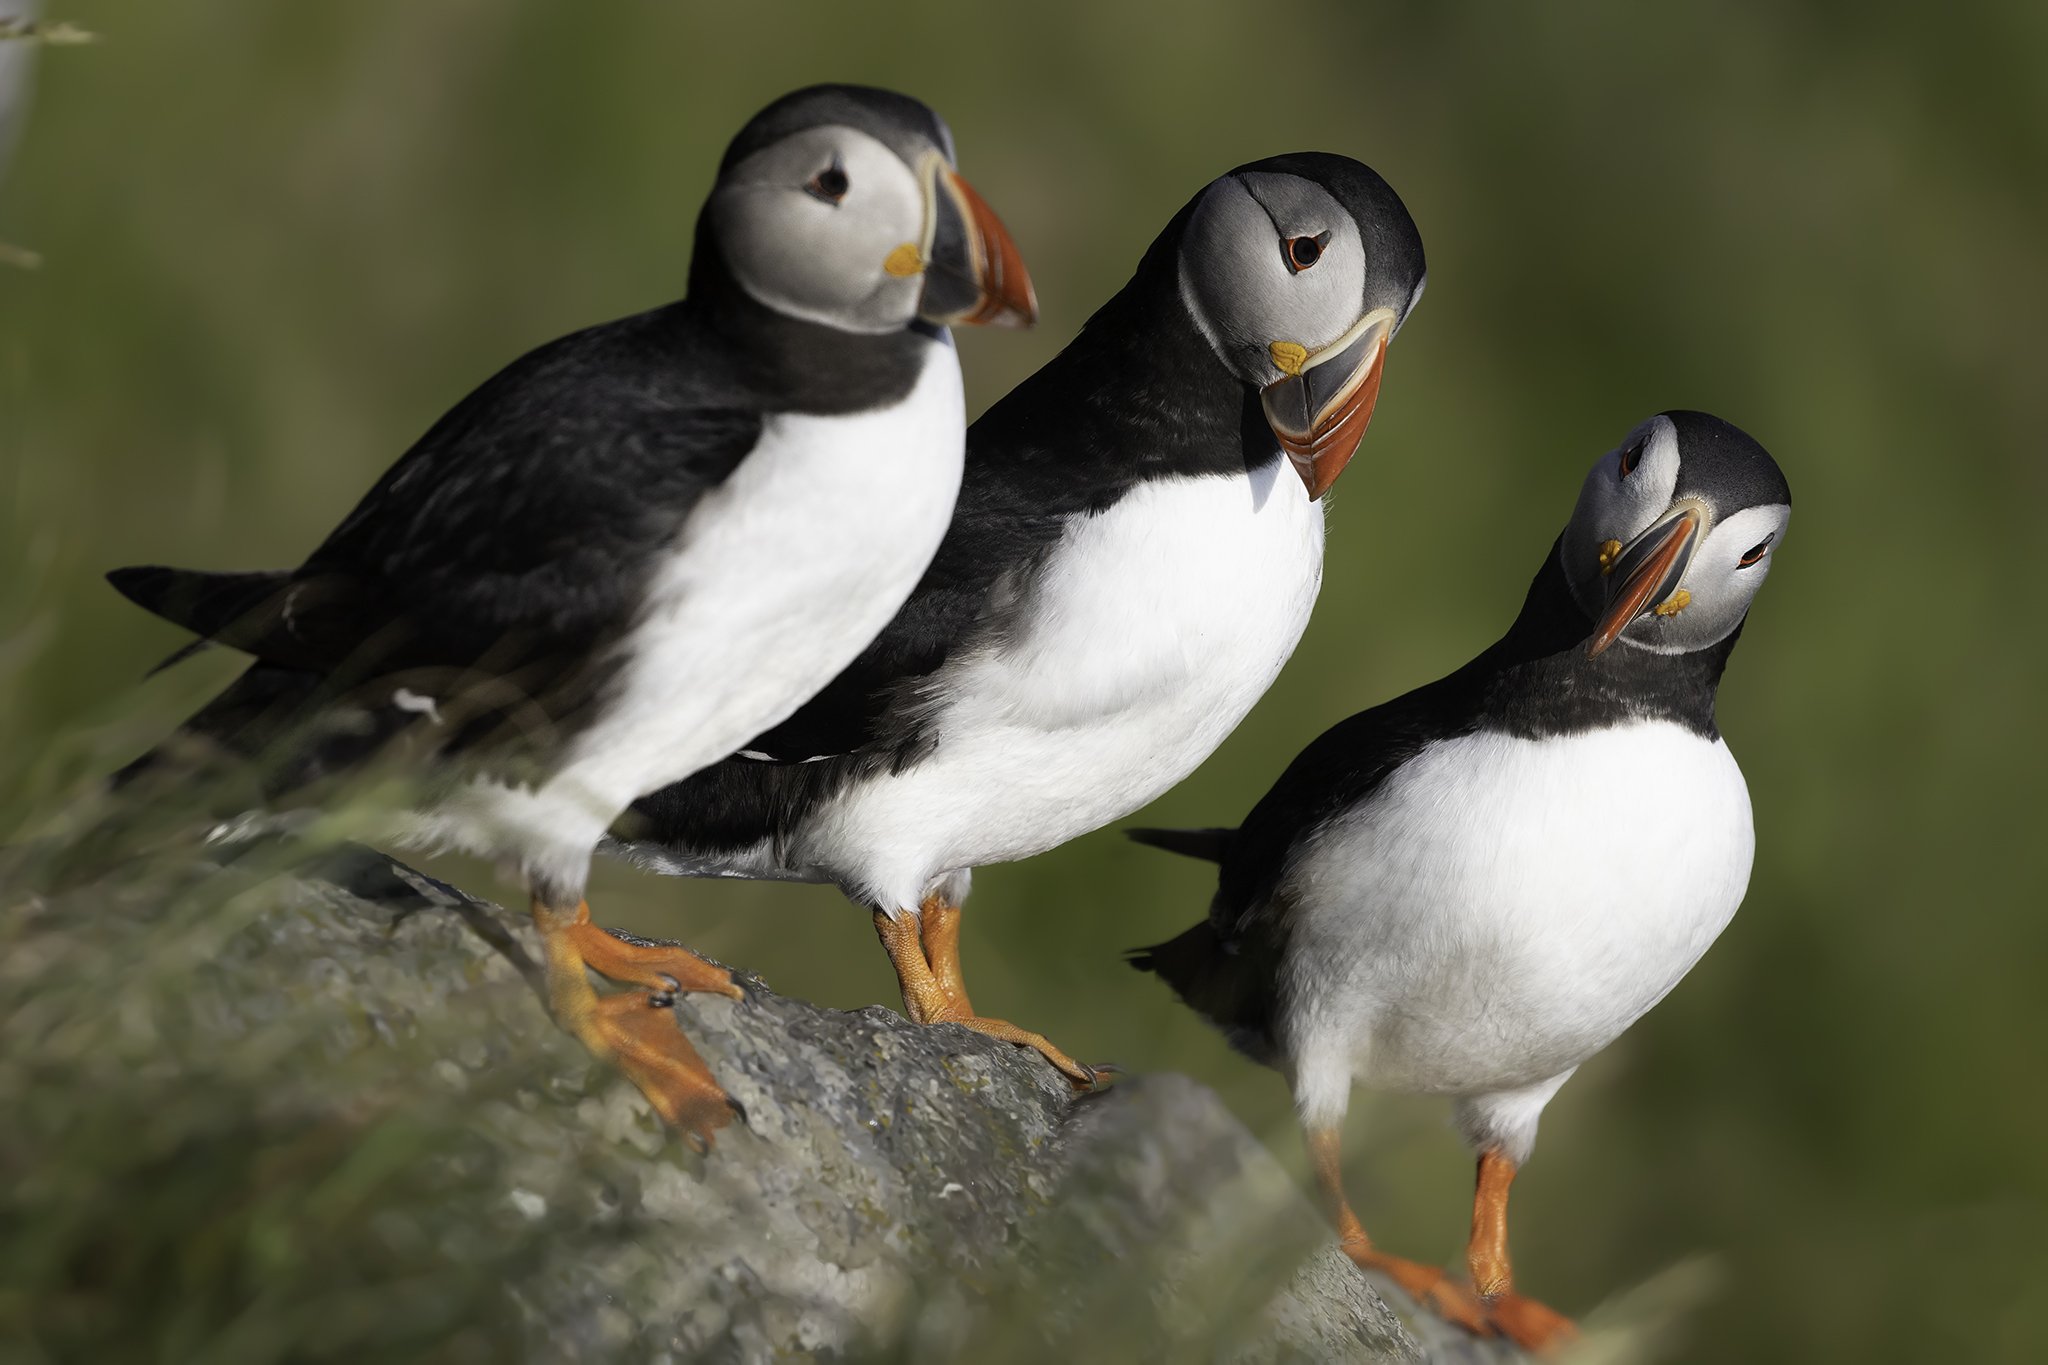 The 3 puffins from Runde